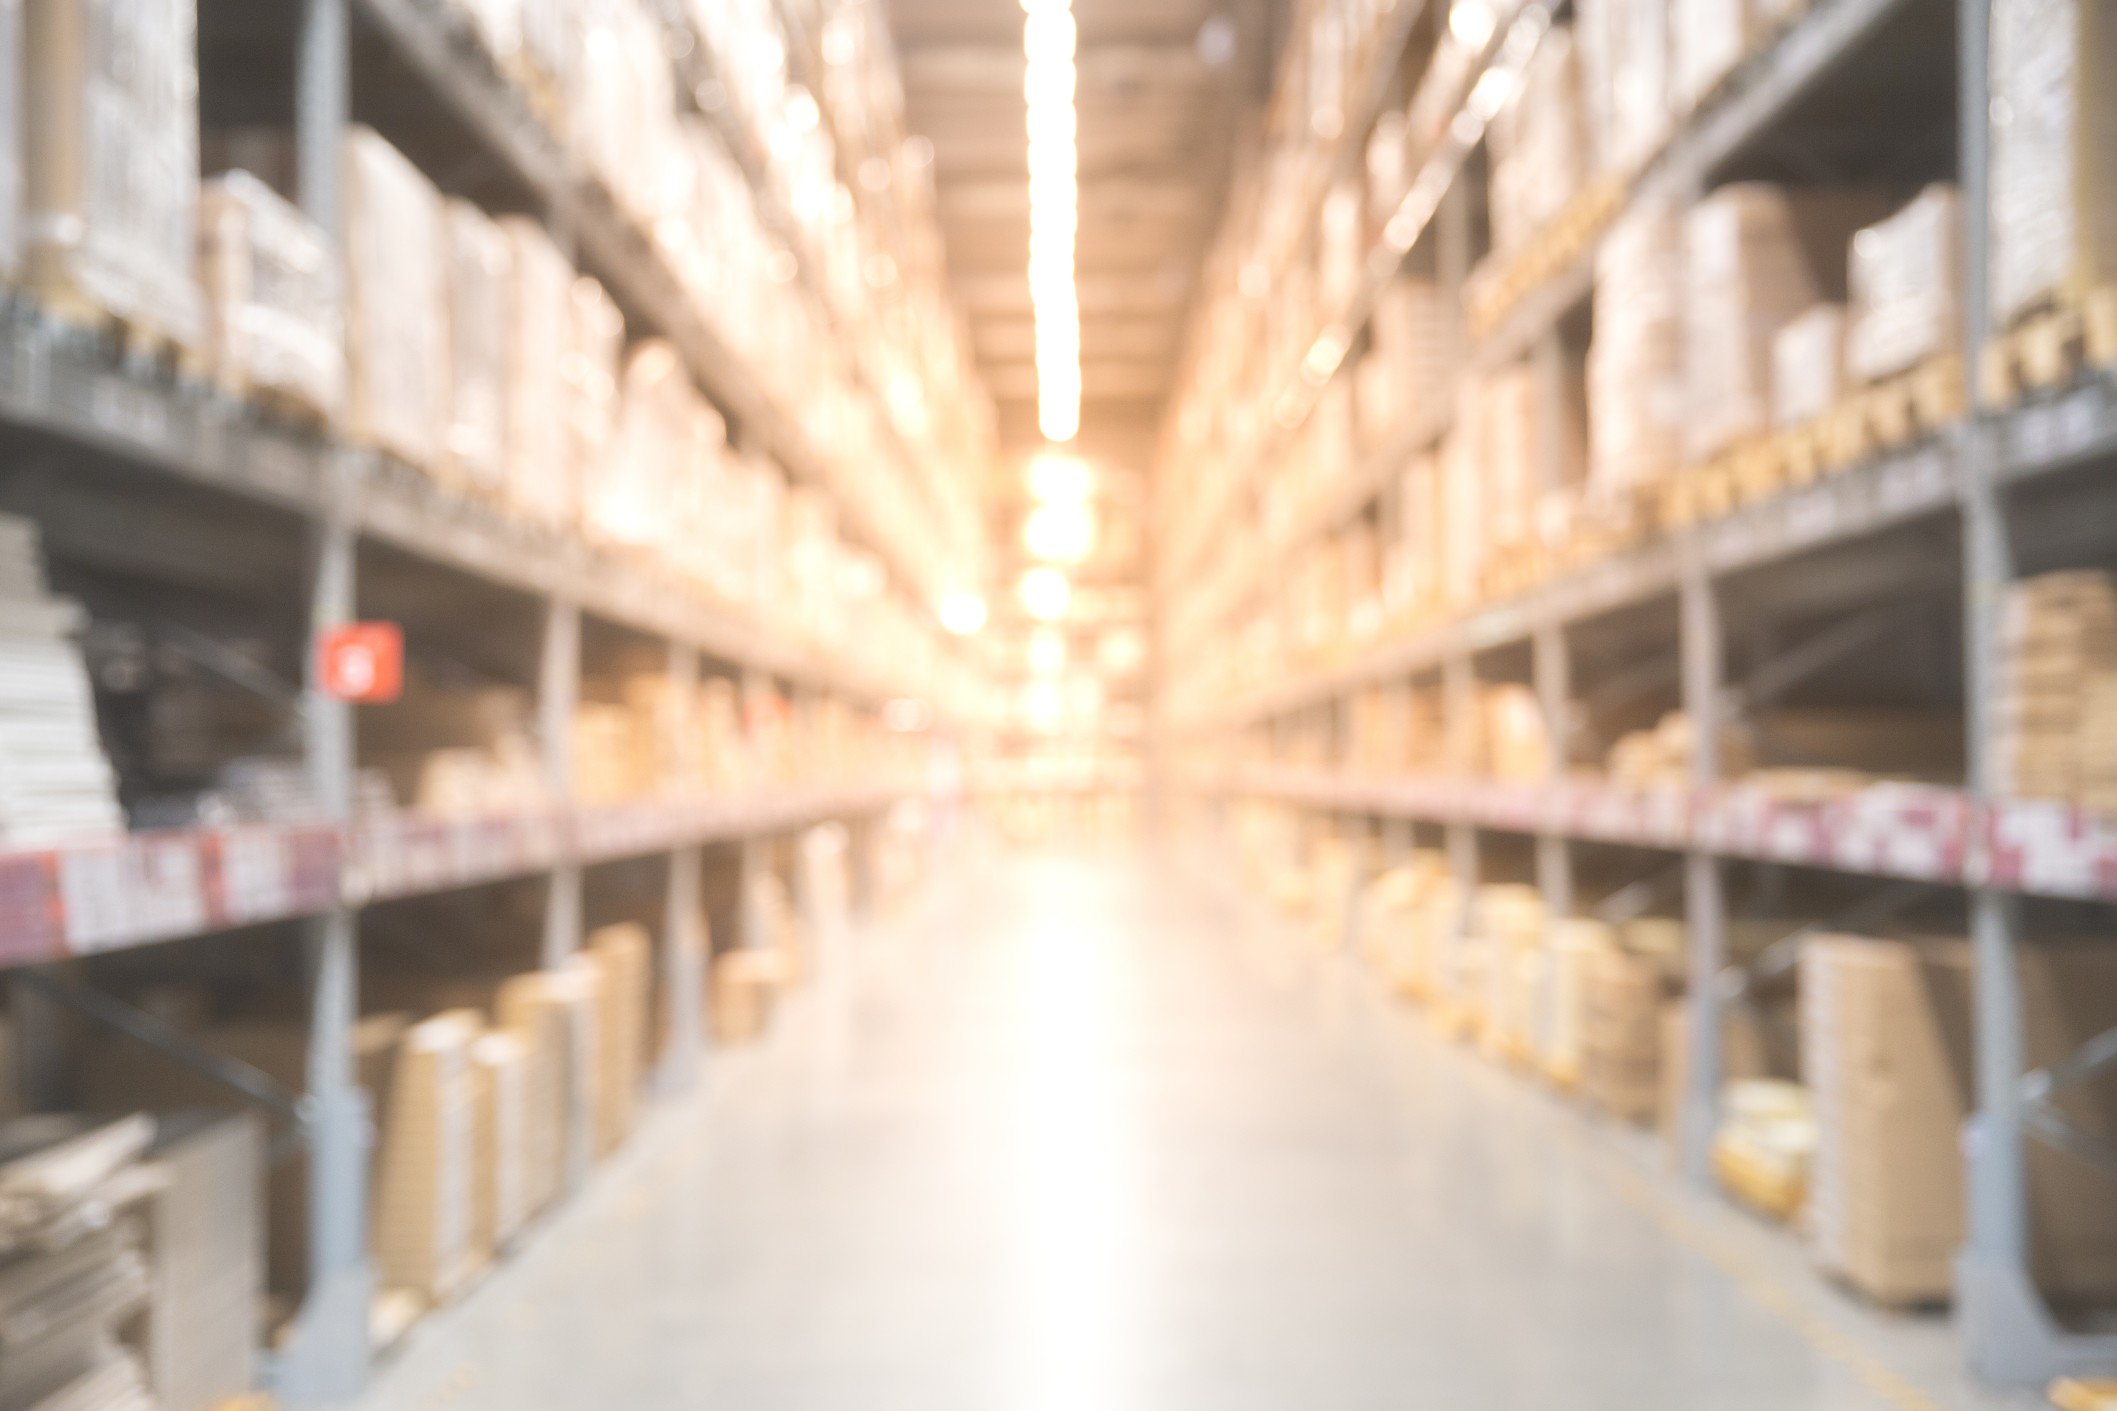 defocused-blurred-boxes-on-rows-of-shelves-in-warm-light-warehouse-background_t20_OpZ4vO